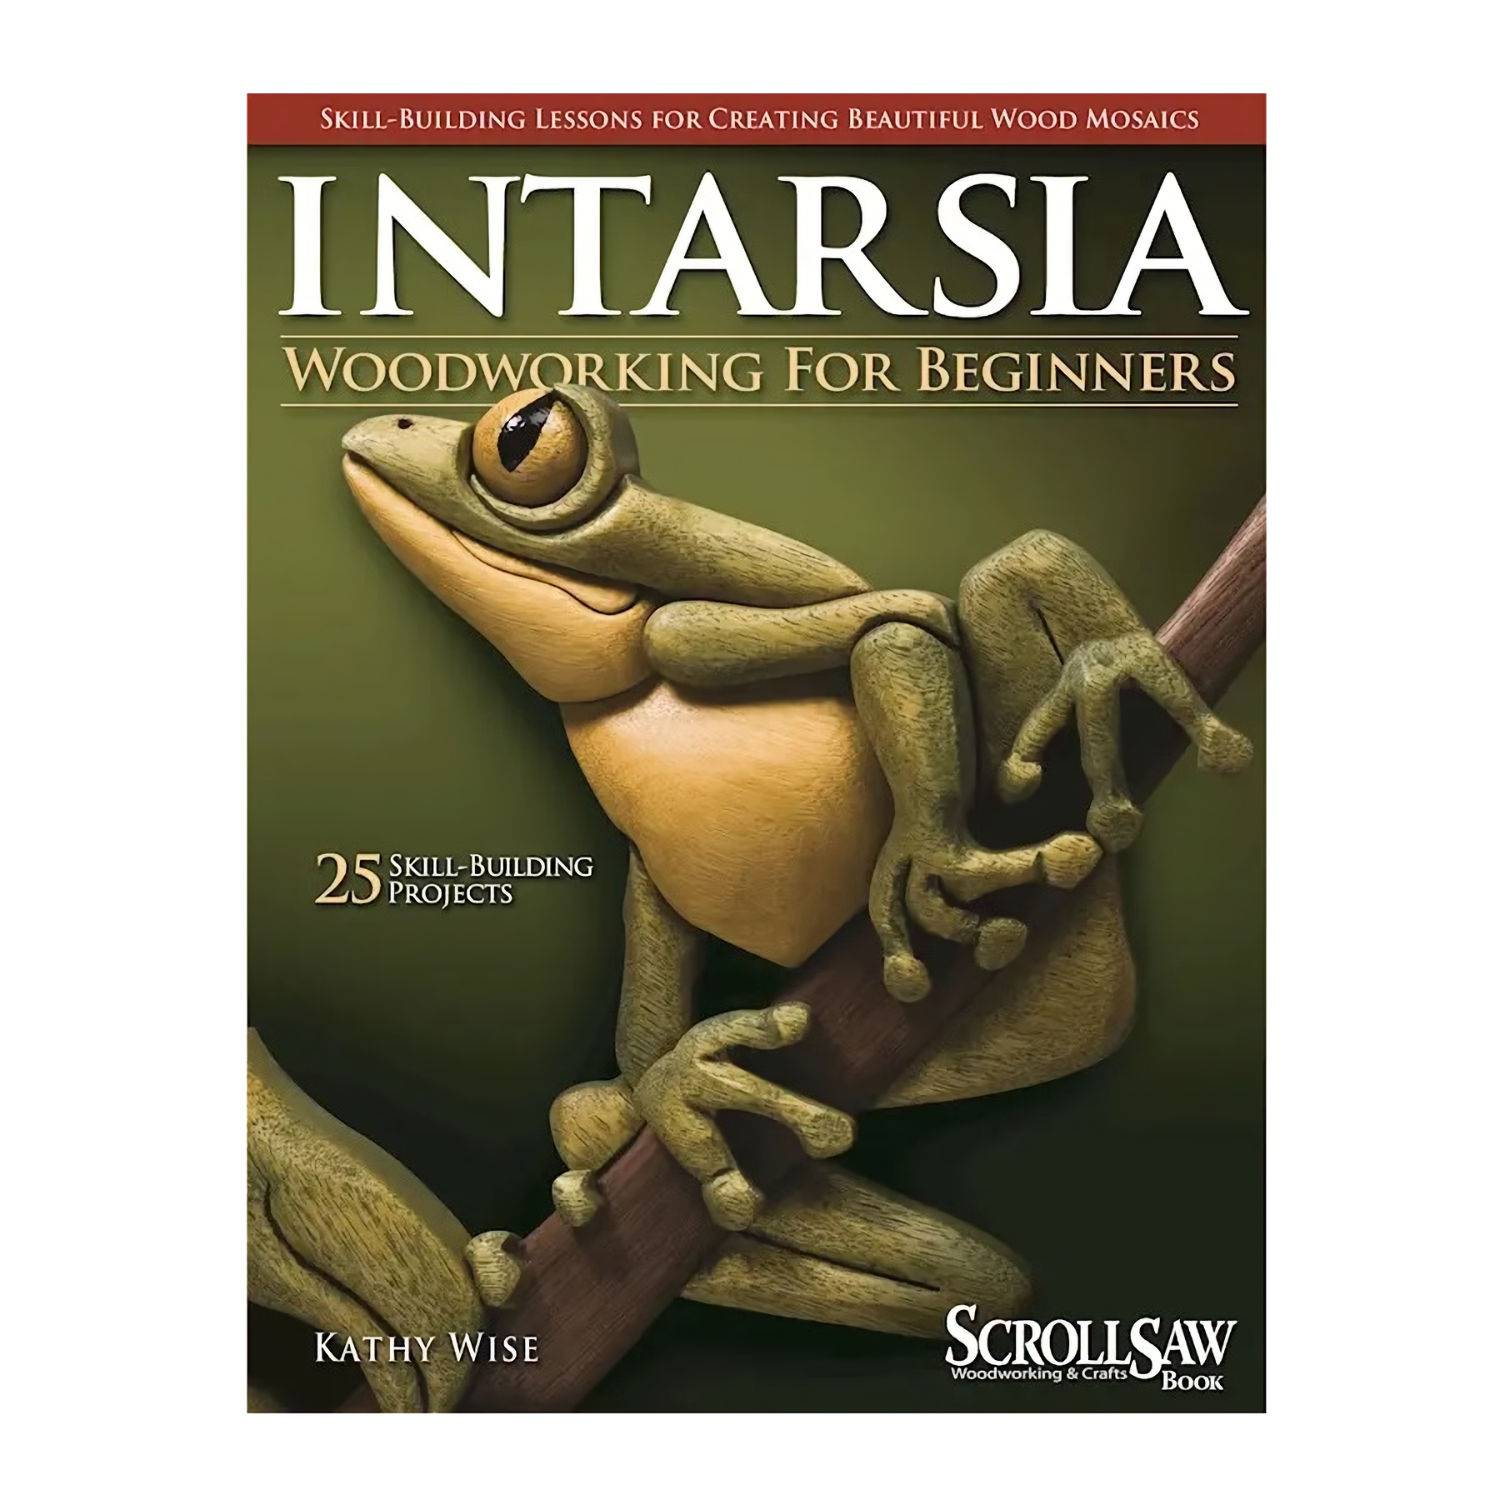 Intarsia-Woodworking-for-Beginners